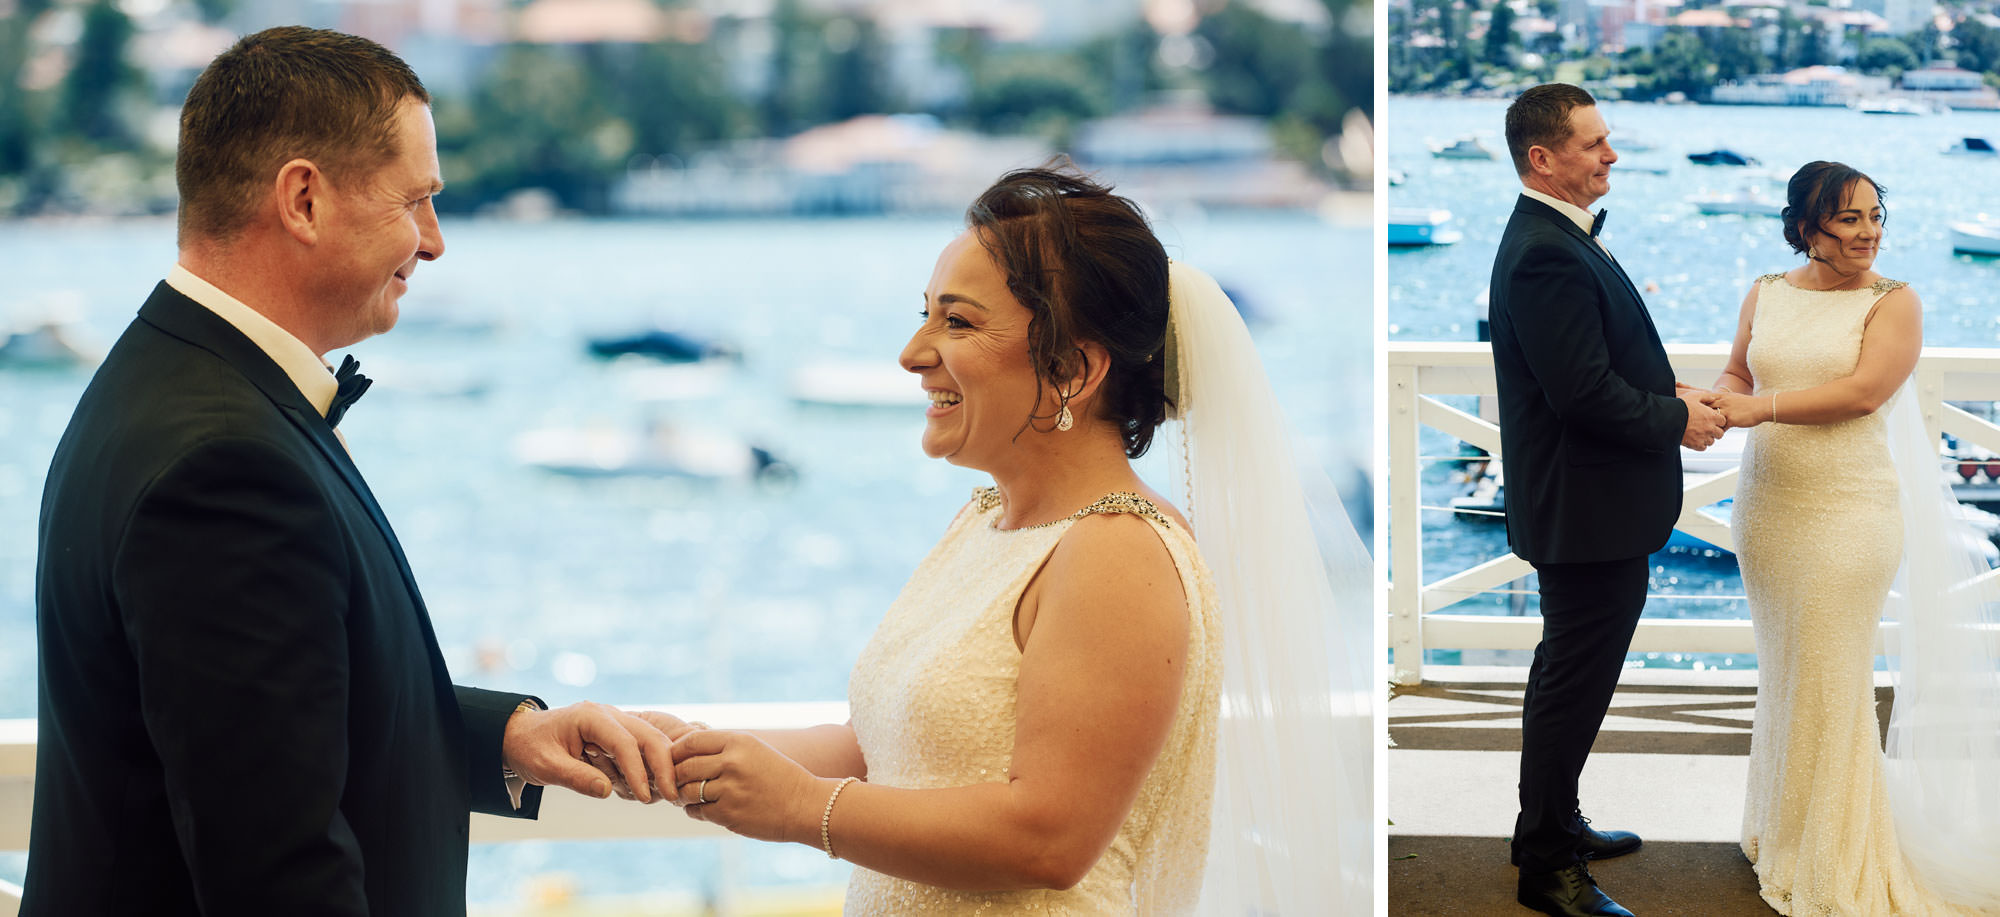 Wedding ceremony at Manly Yacht Club